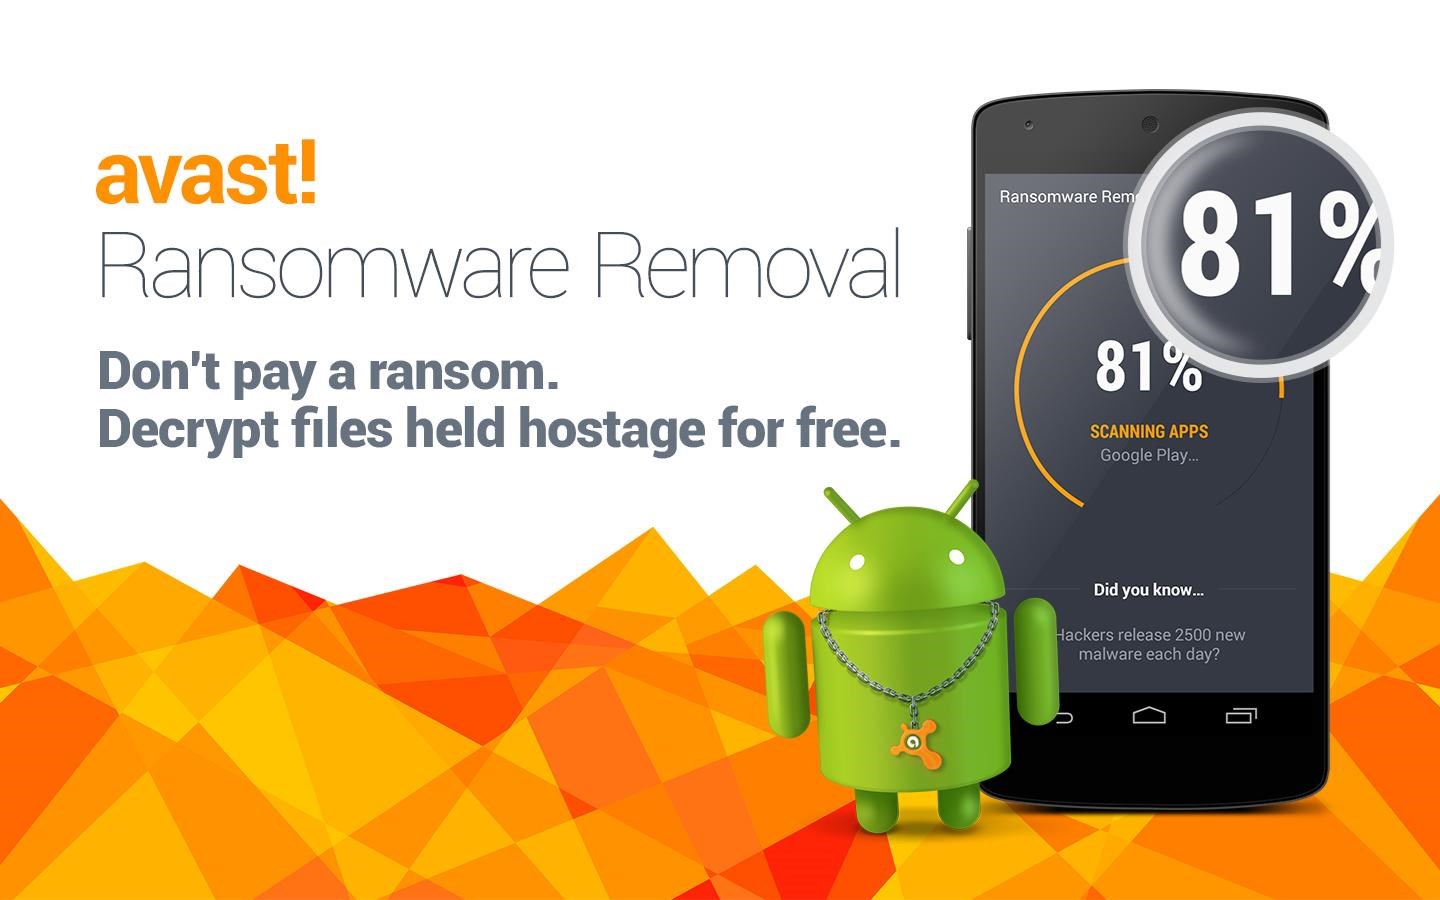 Avast Ransomware Decryption Tools 1.0.0.651 download the new for apple